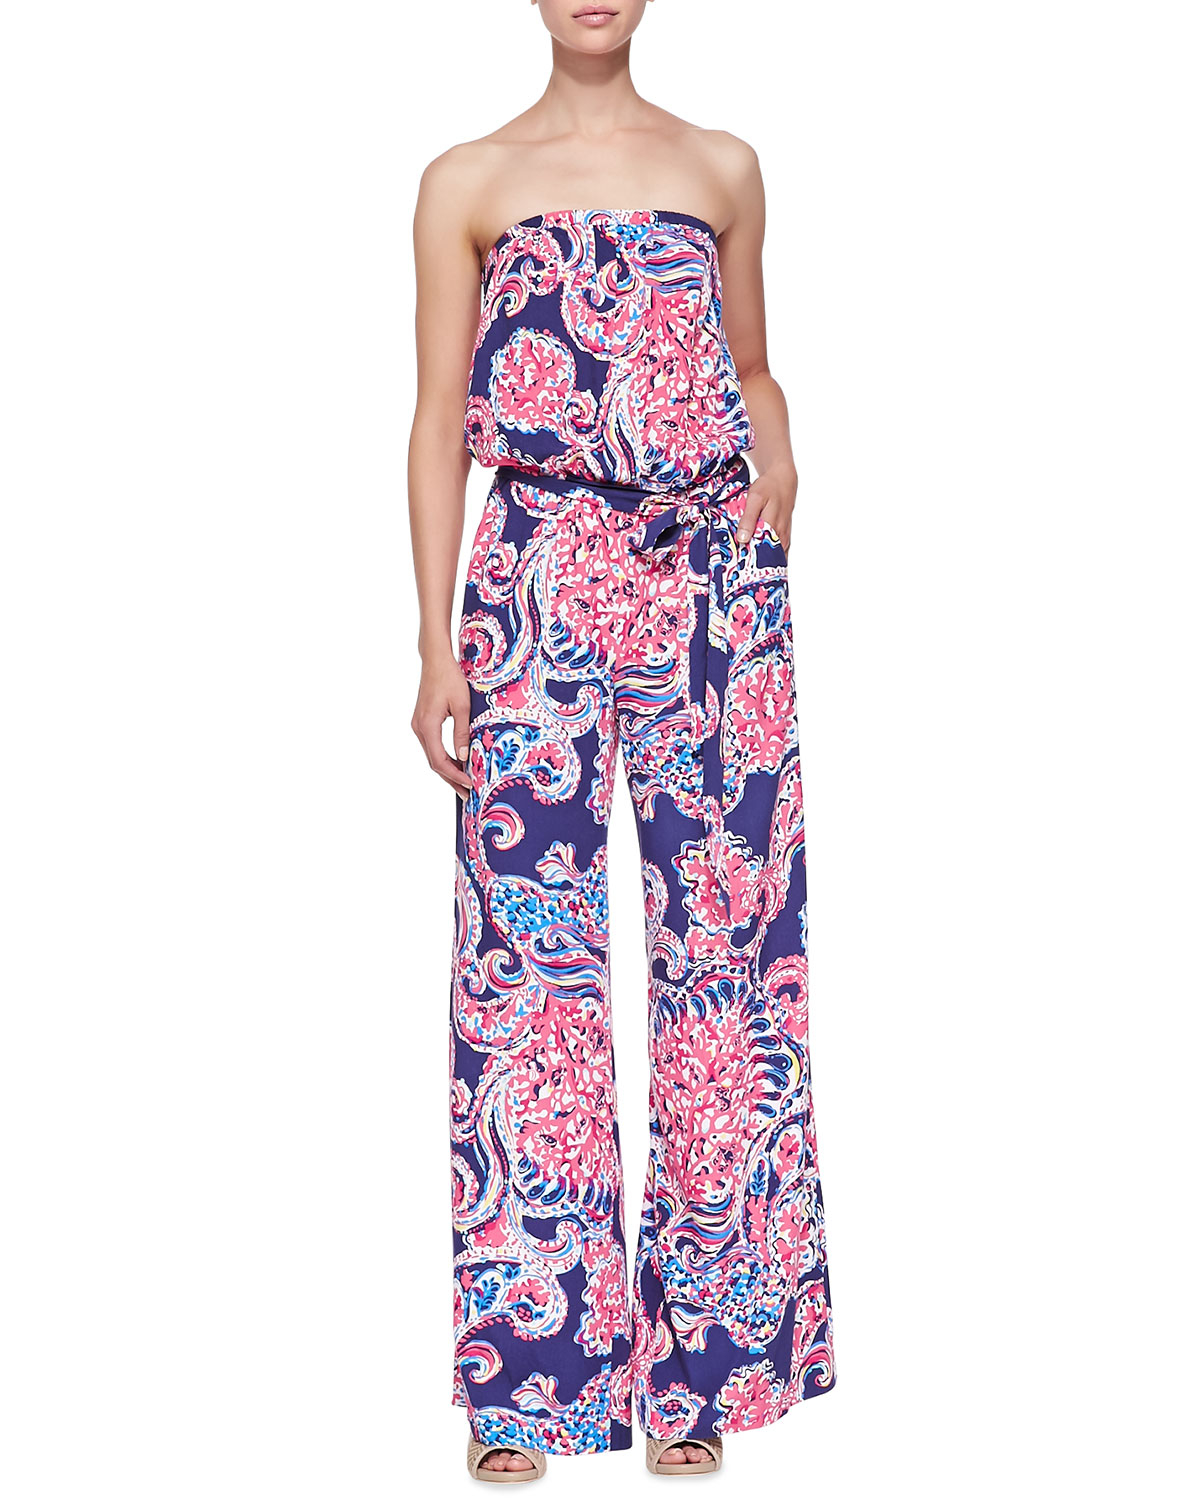 Lyst - Lilly Pulitzer Farrah Printed Strapless Jumpsuit in Blue